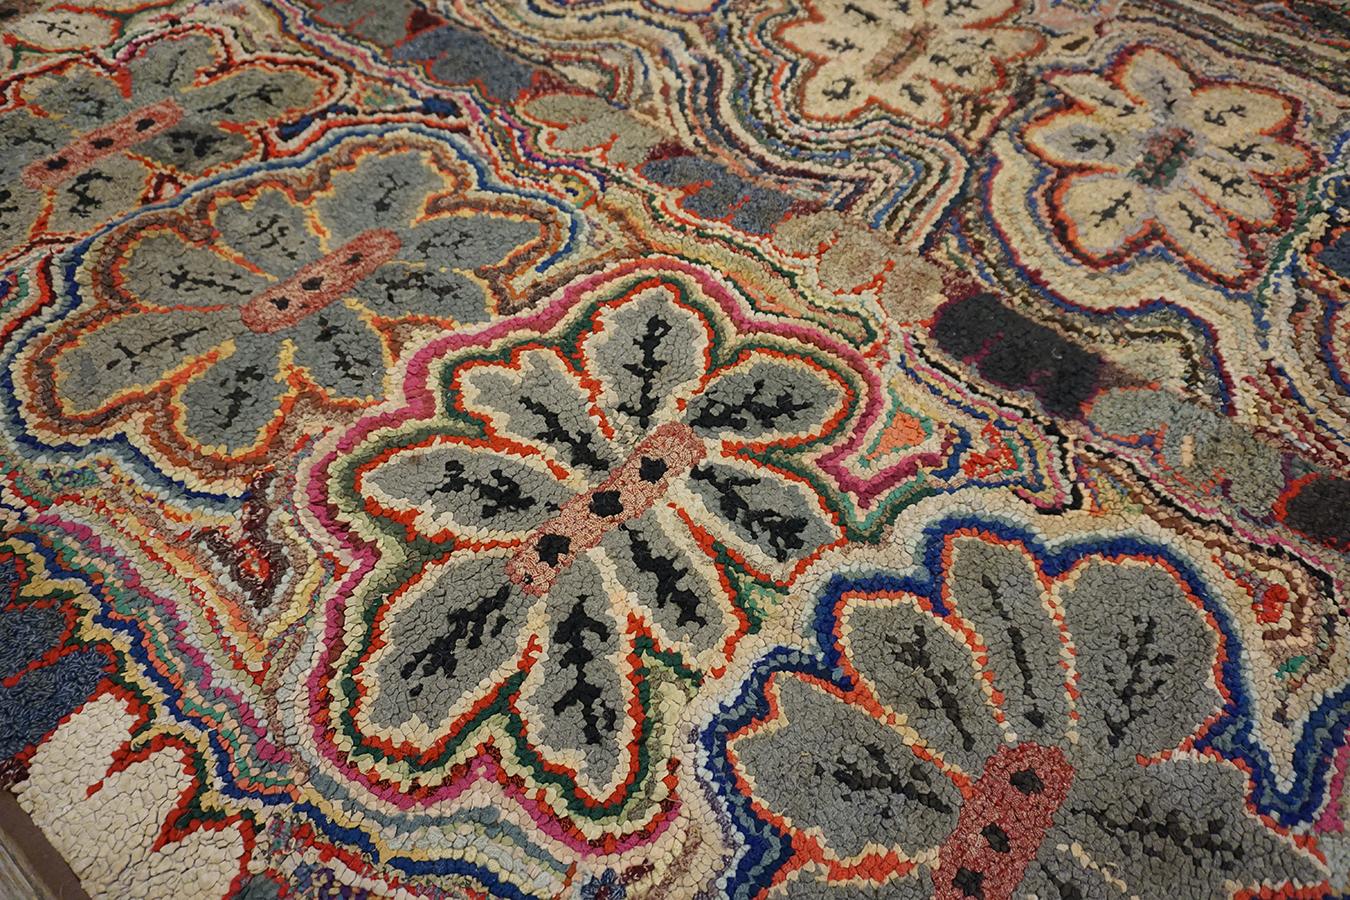 Early 20th Century American Hooked Rug ( 8'4